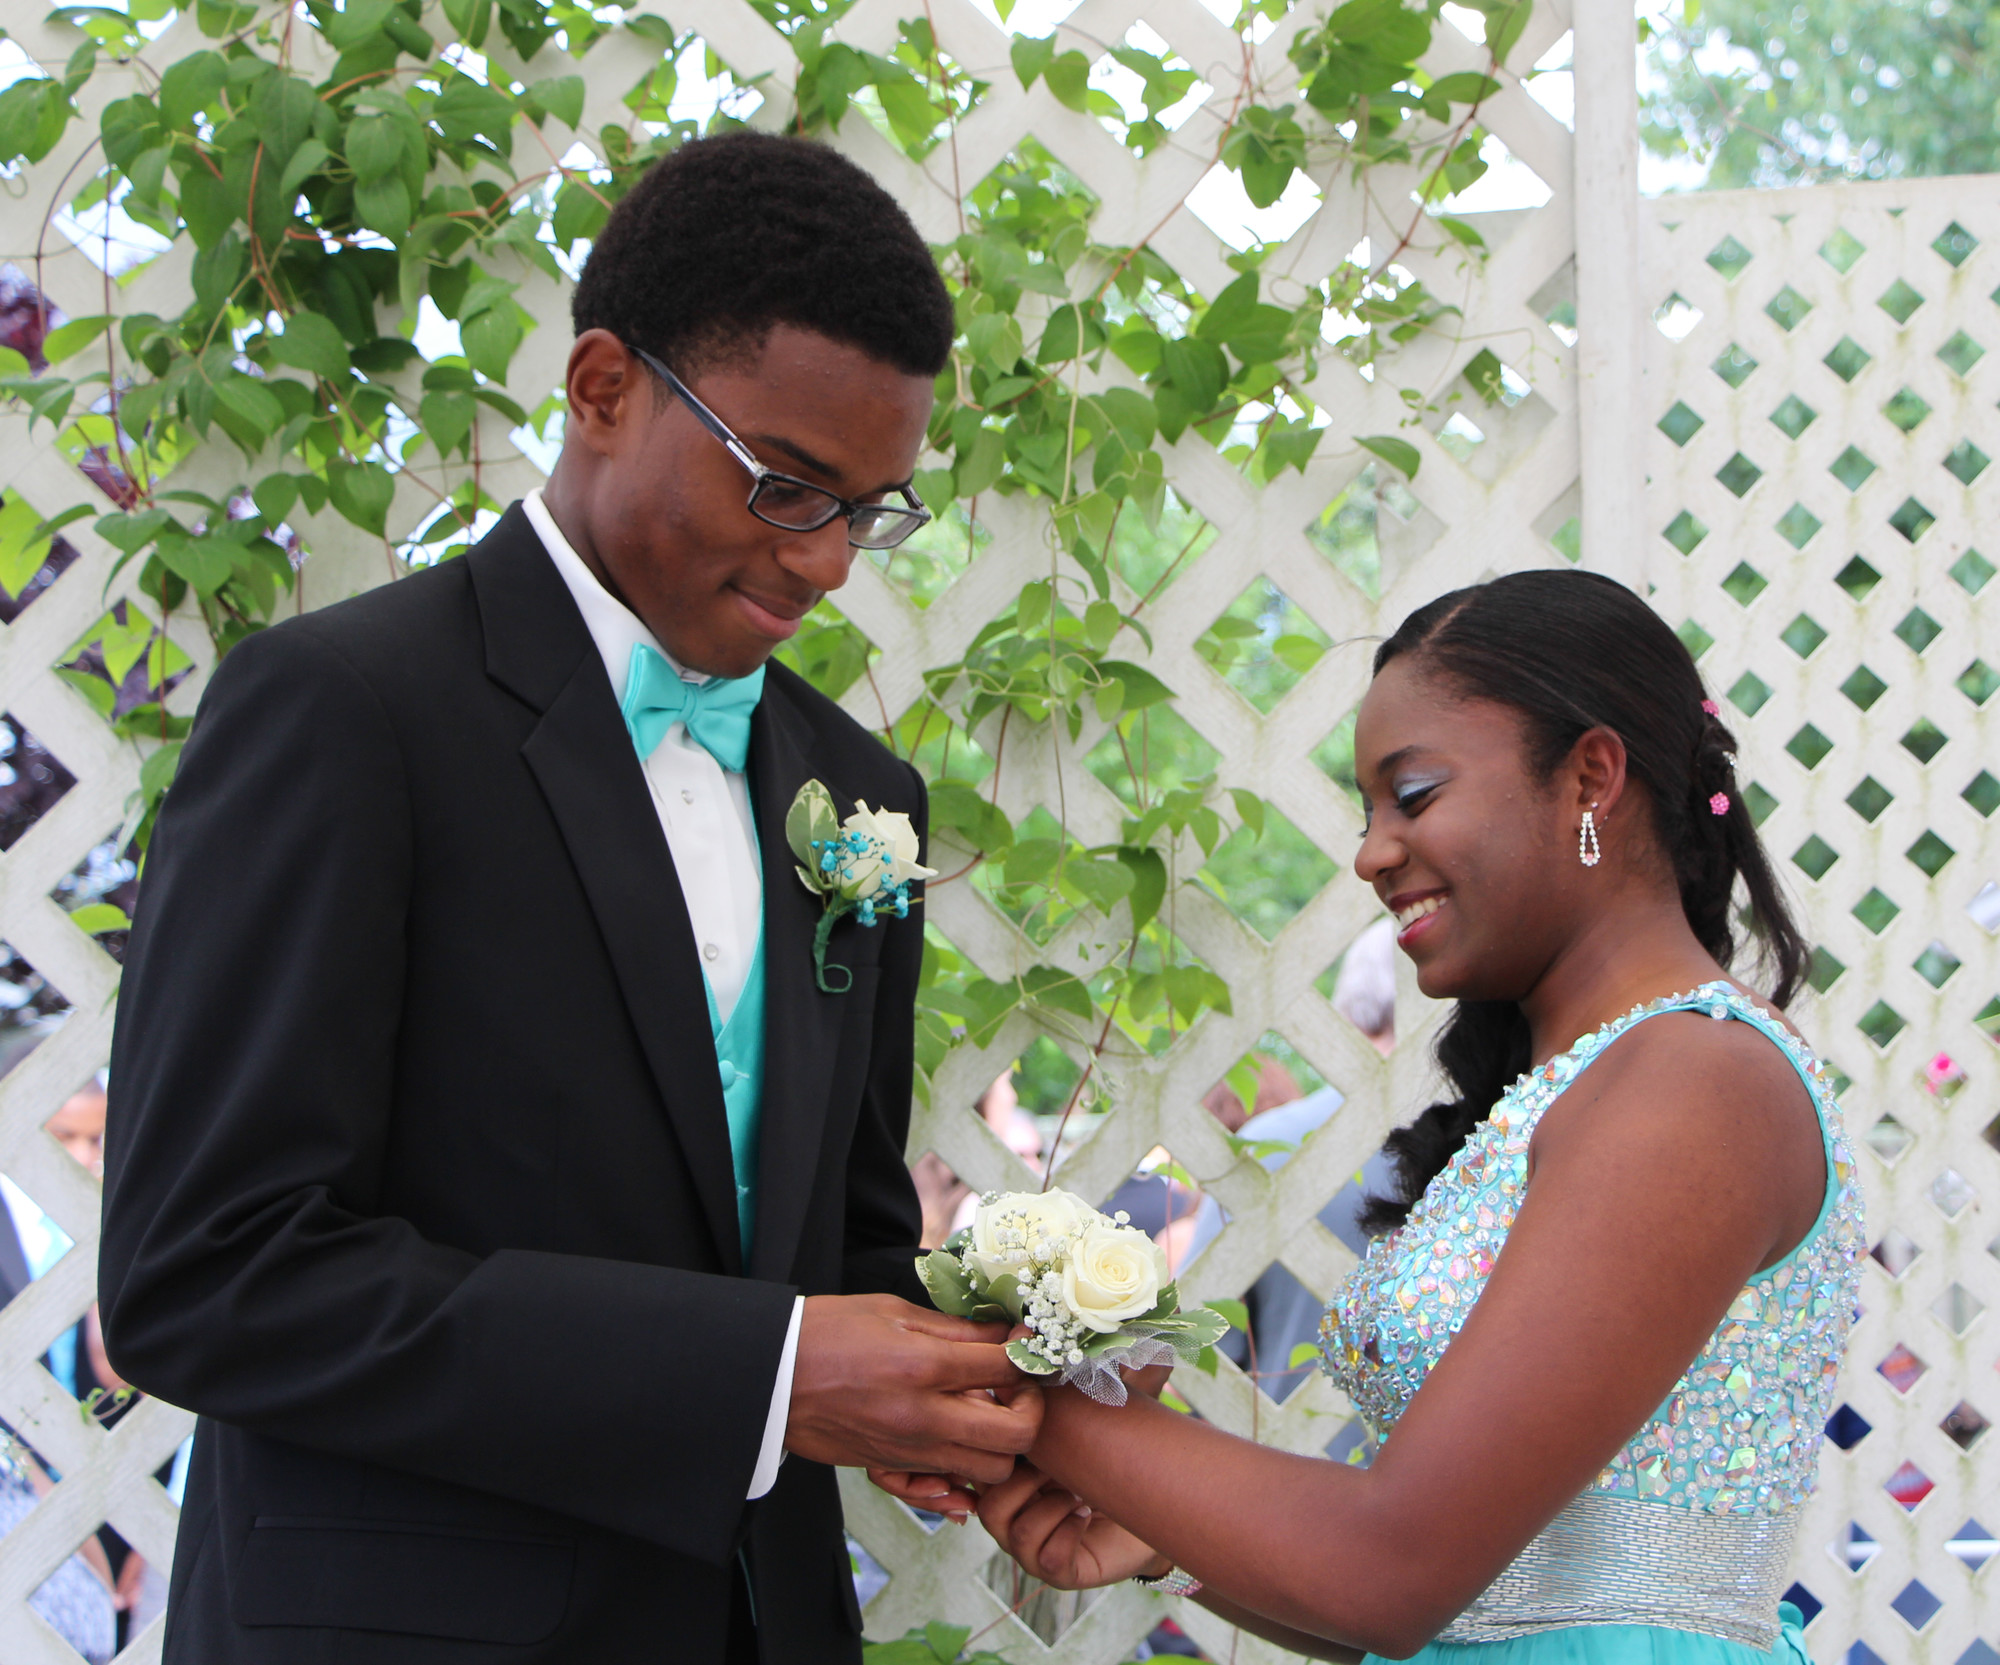 Ashley Johnson and Bradley Brown were all smiles on prom night. Bradley put a flower on Johnson’s wrist prior to the event.